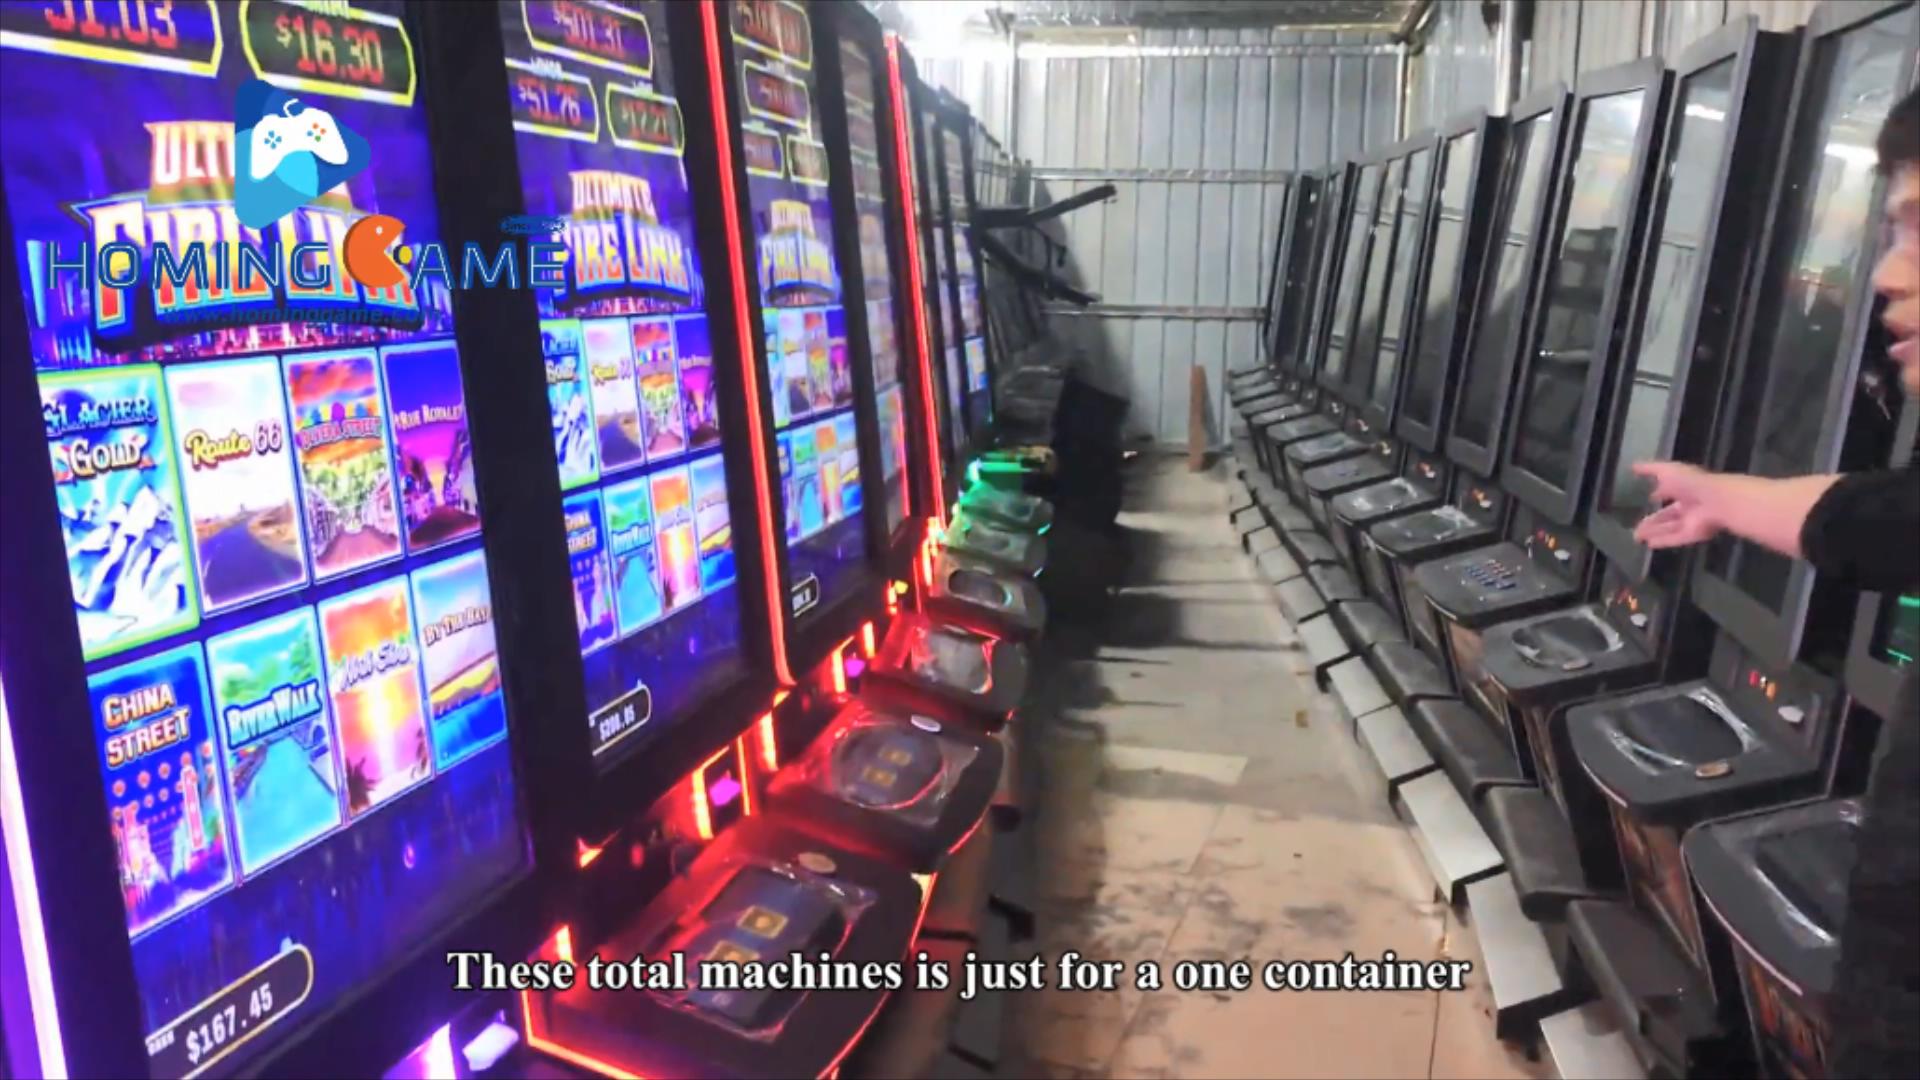 2021 USA Best Slot Table Game Machine Manufactuer By HomingGame Producing All kind of Slot Table,Fire link,Dragon link,Fusion 4,golden master,money gold,lighting ,panda link slot table game machine (Order Call Whatsapp:+8618688409495),43' touch curve monitor 8 in 1 fire link slot table game machine,8 in 1 fire link slot game machine,slot table game machine,43' touch screen fire link slot game machine,43' touch monitor fire link slot table game machine,43' curve touch monitor fire link slot gaming machine,dragon link slot game machine,panda link slot game machine,golden buffalo slot game machine,fusion 4 slot game machine,ultimate fire link,ultimate fire link slot game machine,ultimate fire link slot game,fire link slot game machine,fire link,ultimate fire link slot gaming machine,ultimate fire link slot table gaming machine,slot game,slot table game,slot gaming machine,game machine,arcade game machine,coin operated game machine,arcade game machine for sale,amsuement machine,entertainment game machine,family entertainment game machine,hominggame,www.gametube.hk,indoor game machine,casino,gambling machine,electrical game machine,slot,slot game machine for sale,slot table for sale,simulator game machine,video game machine,video game,video game machine for sale,hominggame fire link slot game,slot gaming